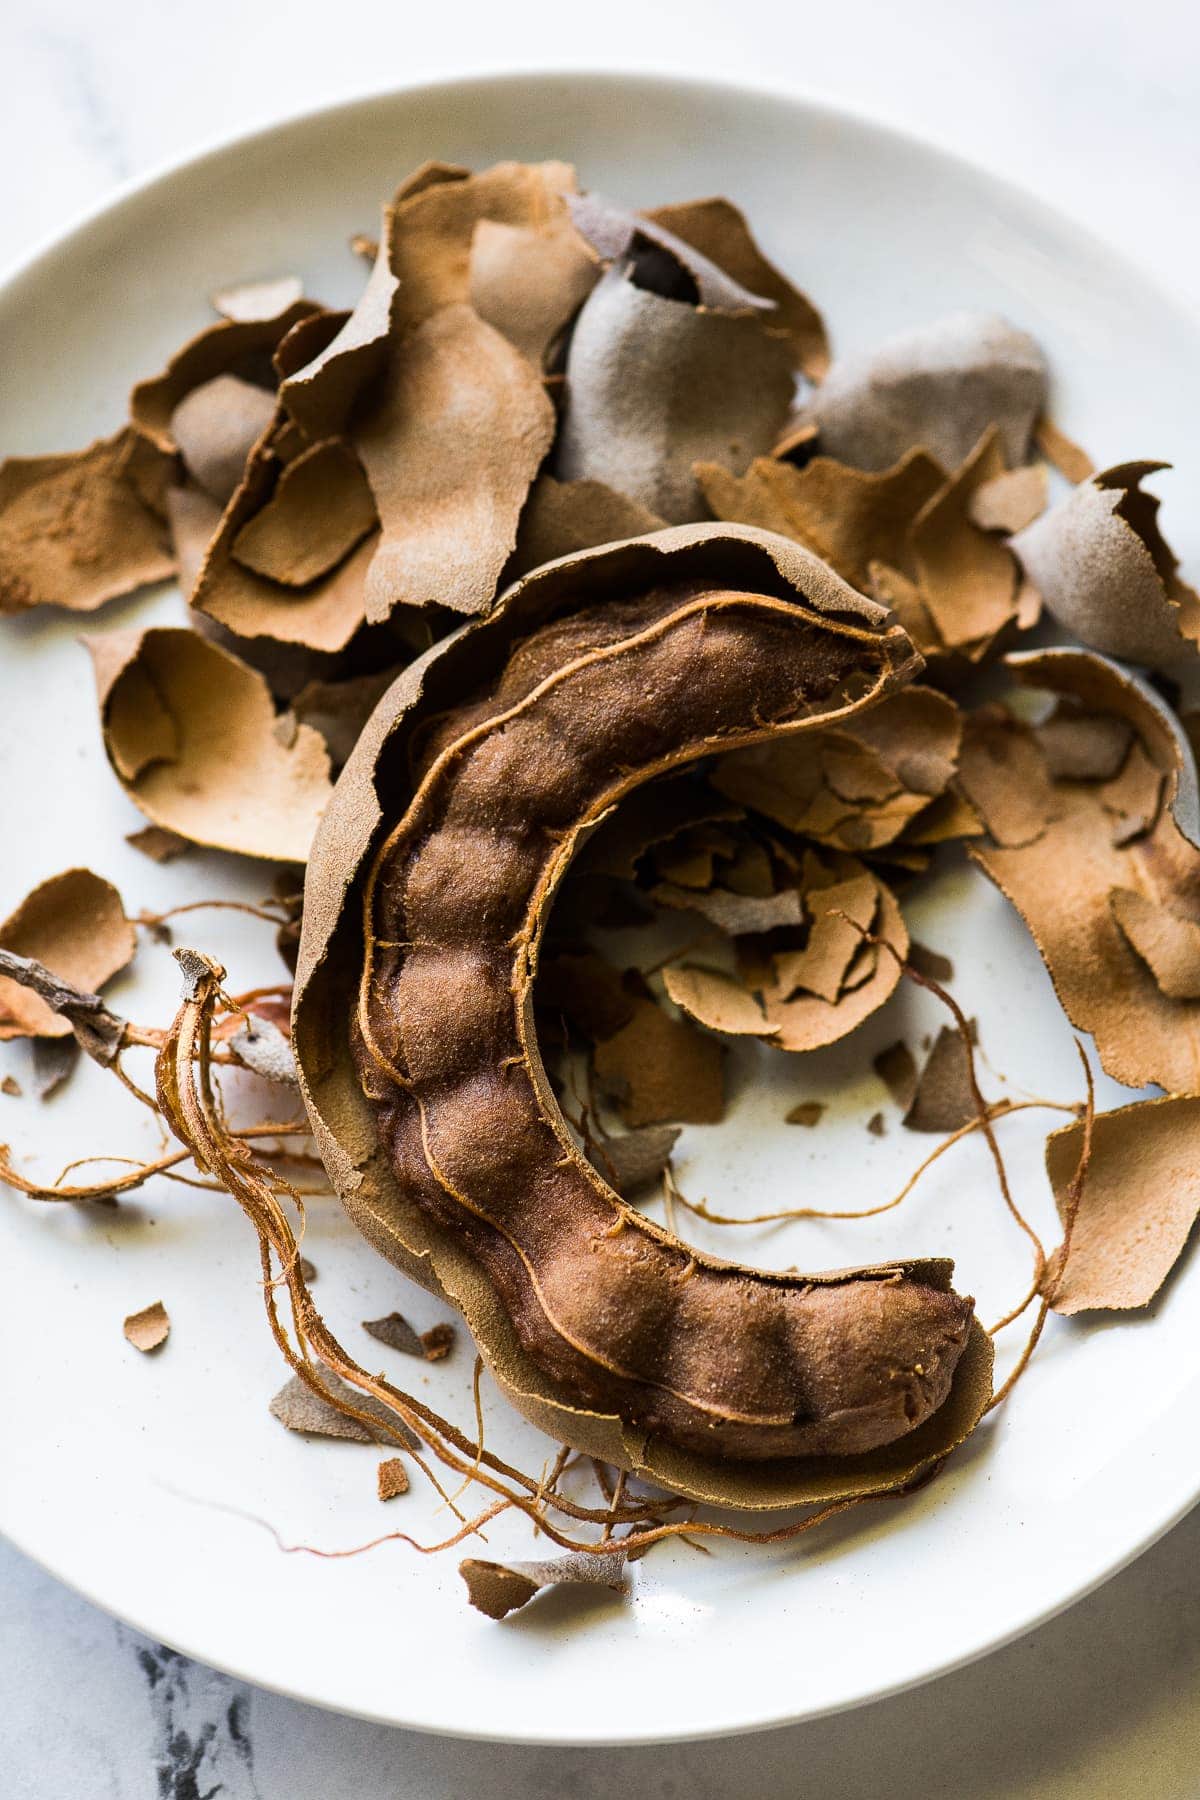 What is Tamarind?